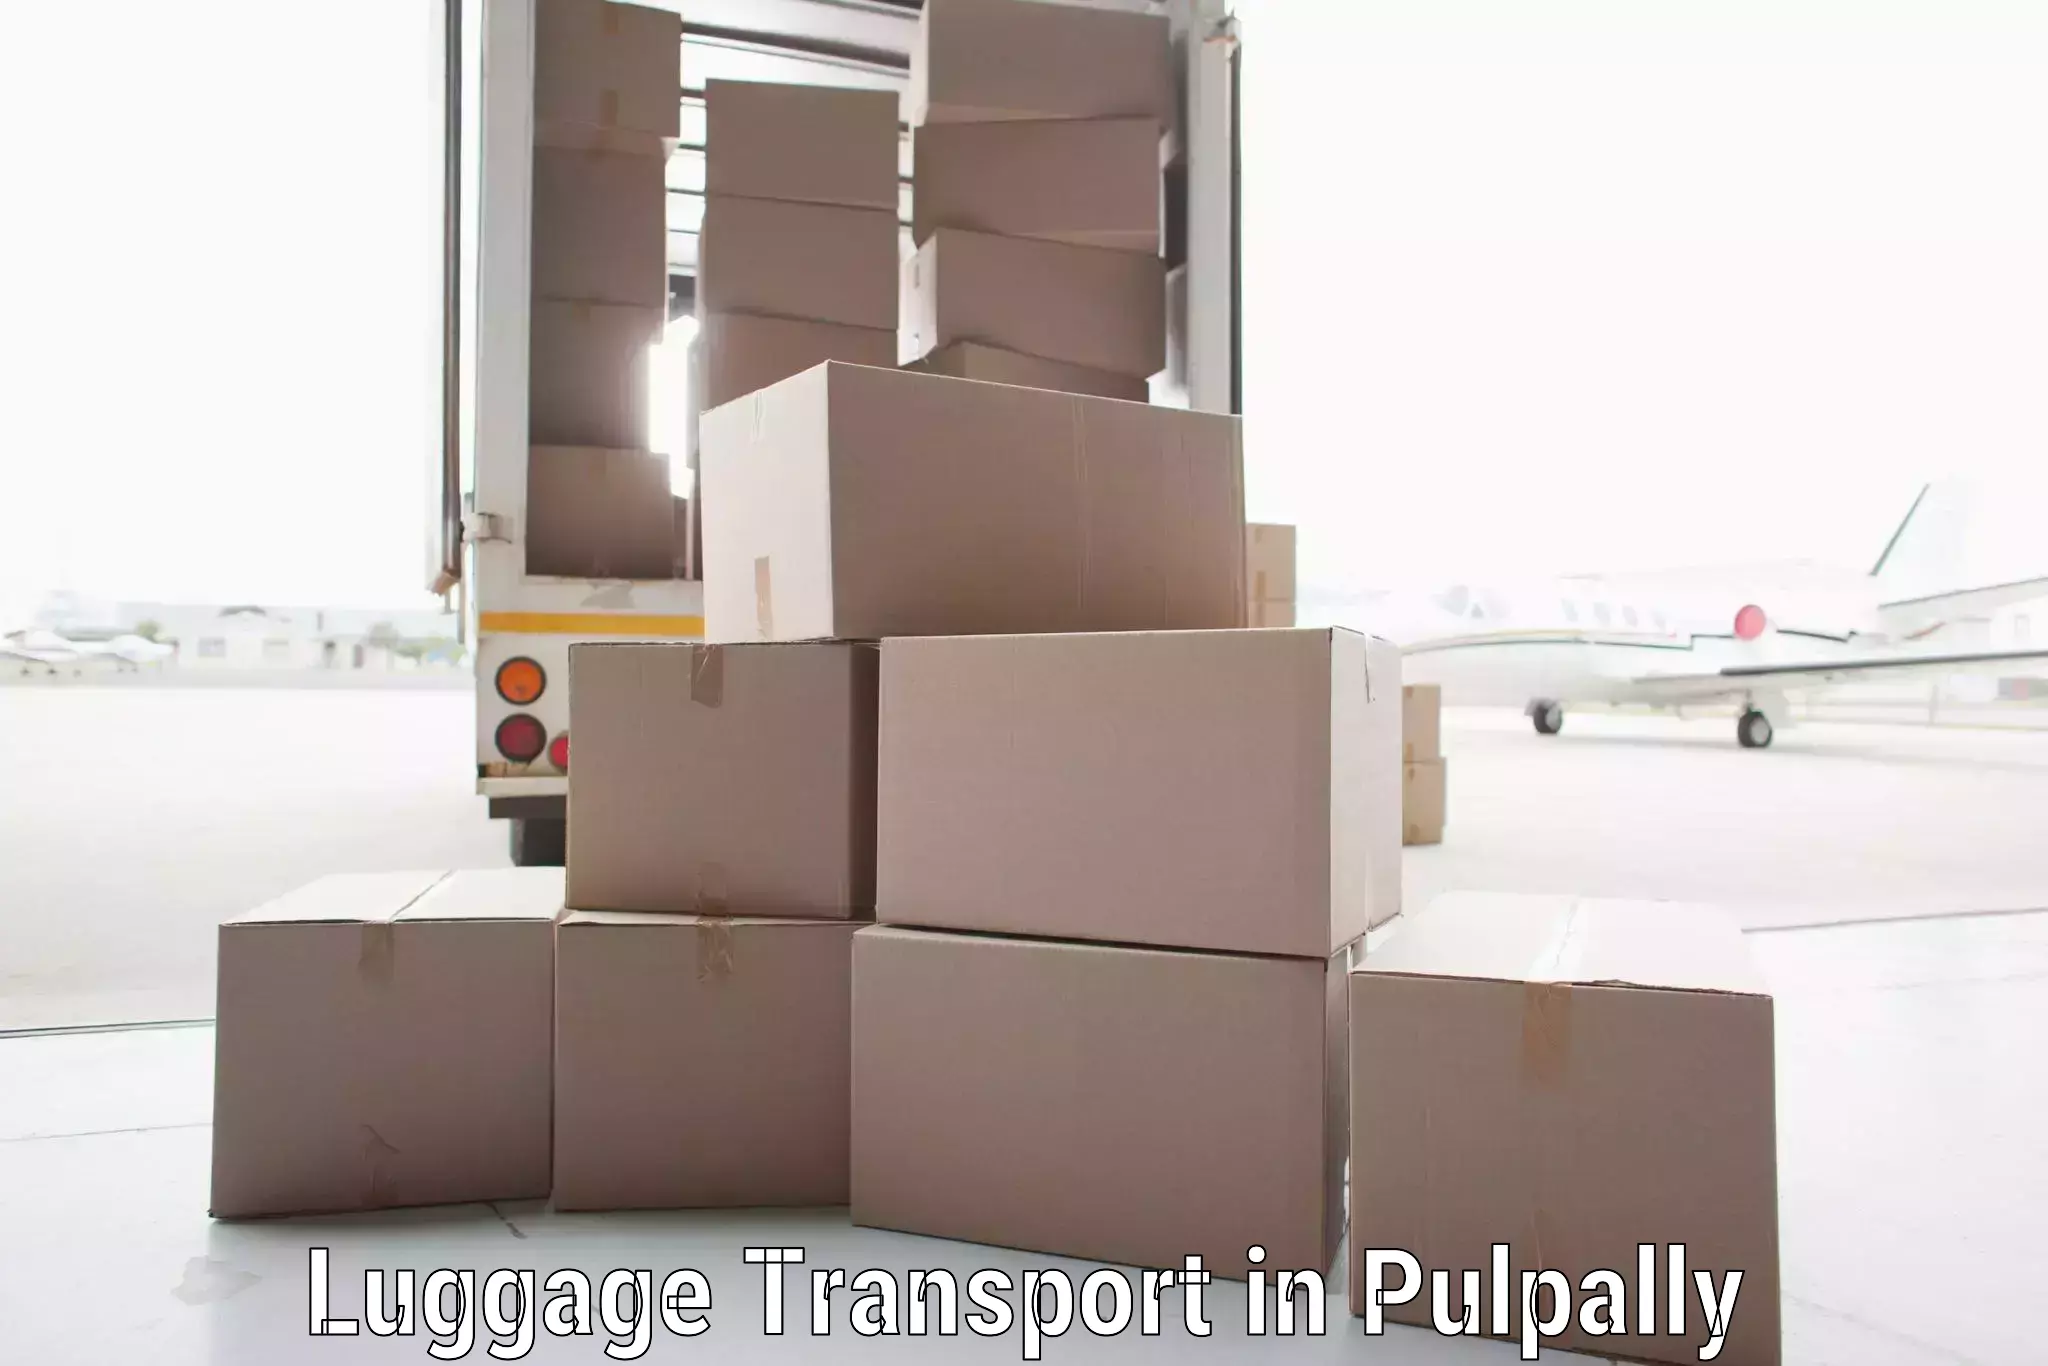 Luggage transit service in Pulpally